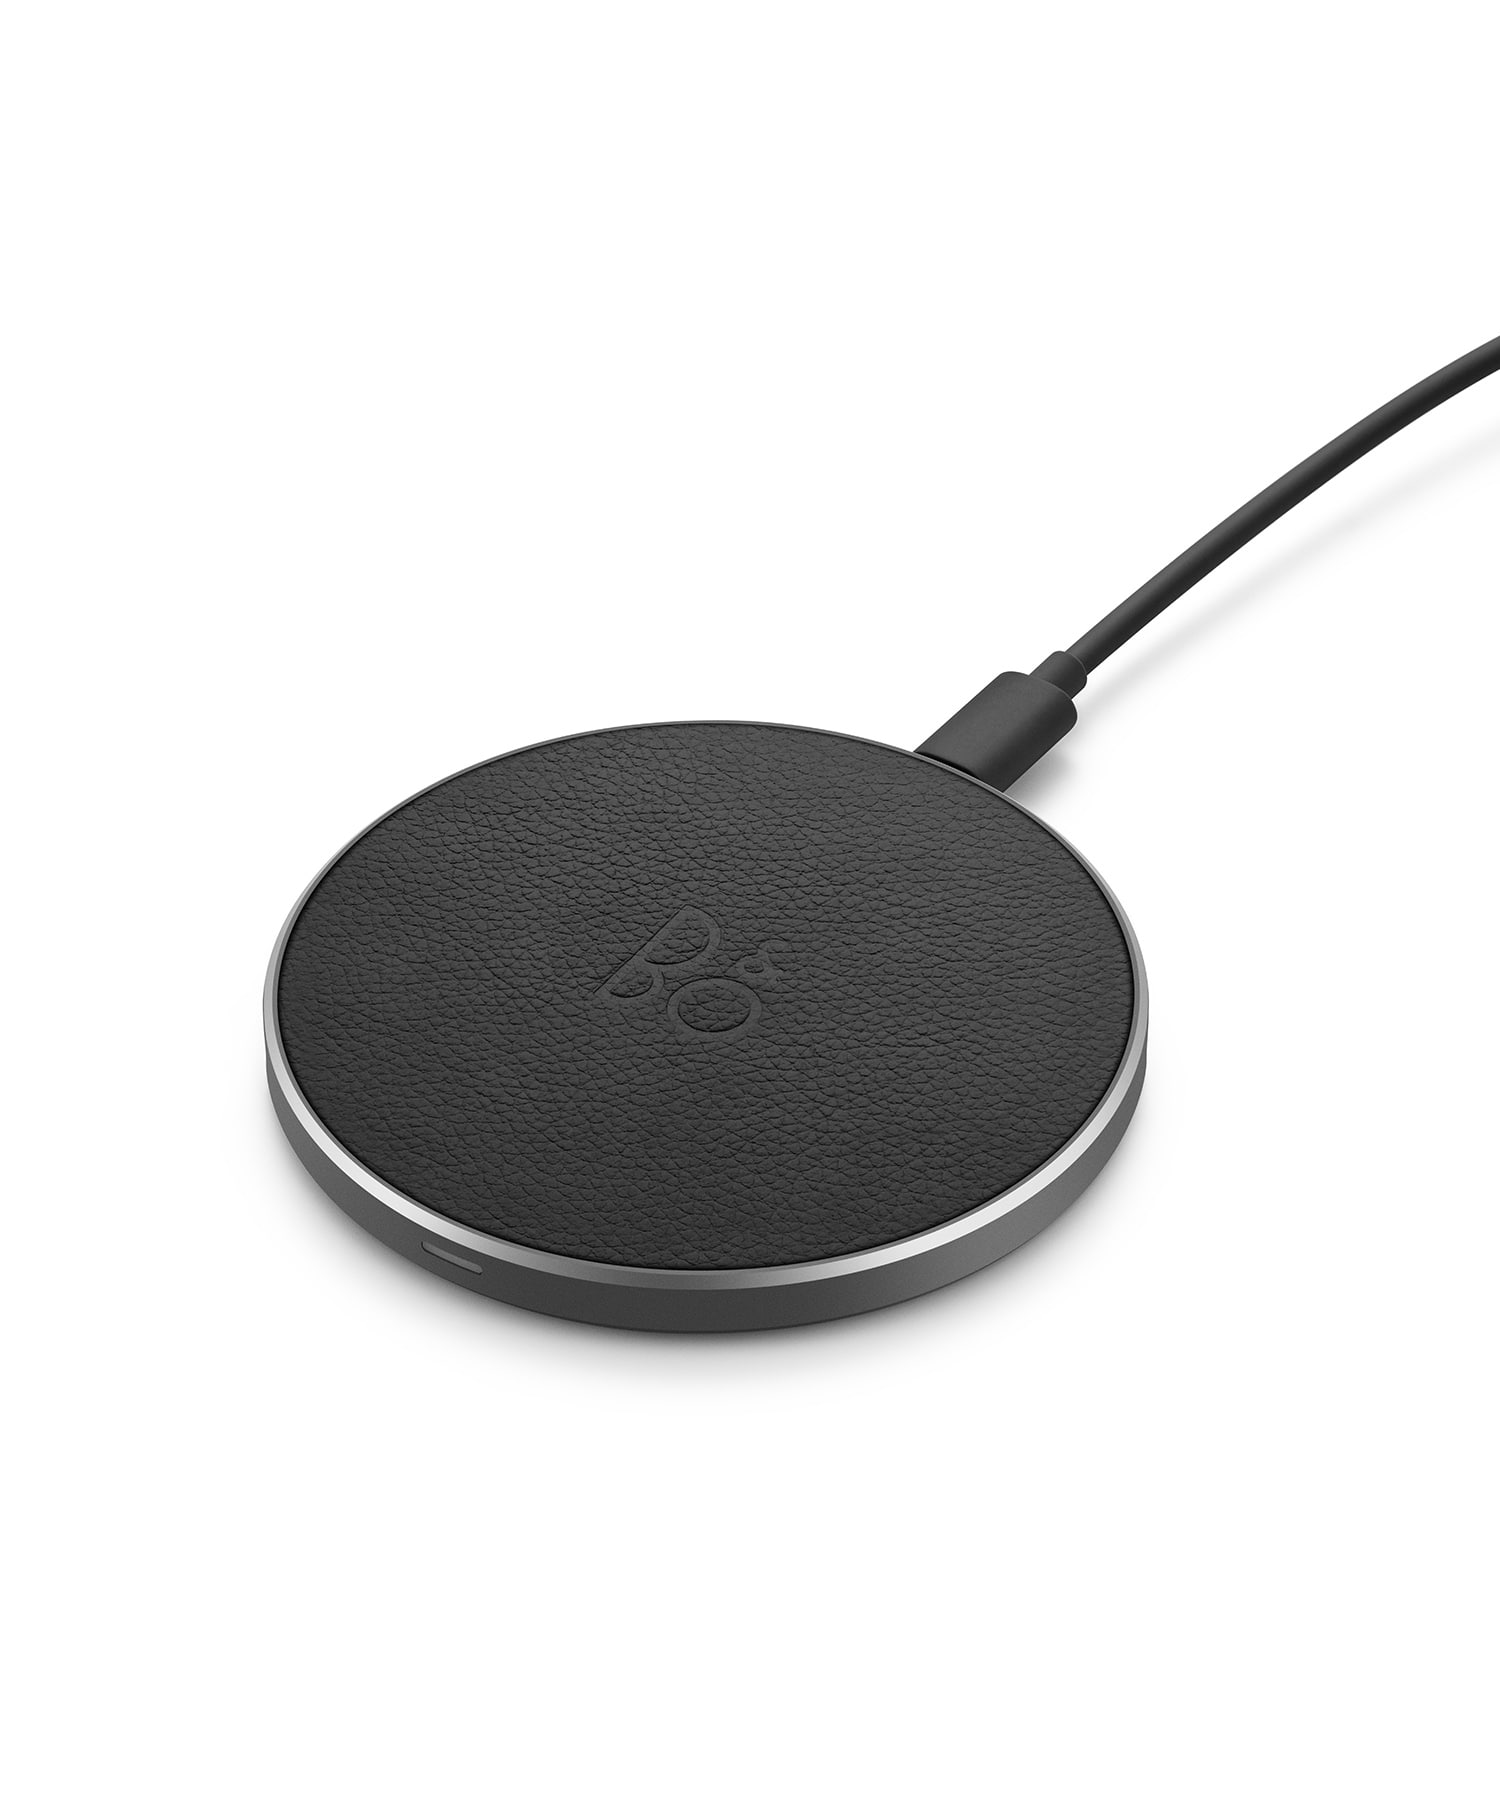 "BEOPLAY CHARGING PAD" Qi対応ワイヤレス充電器 詳細画像 ブラック 1